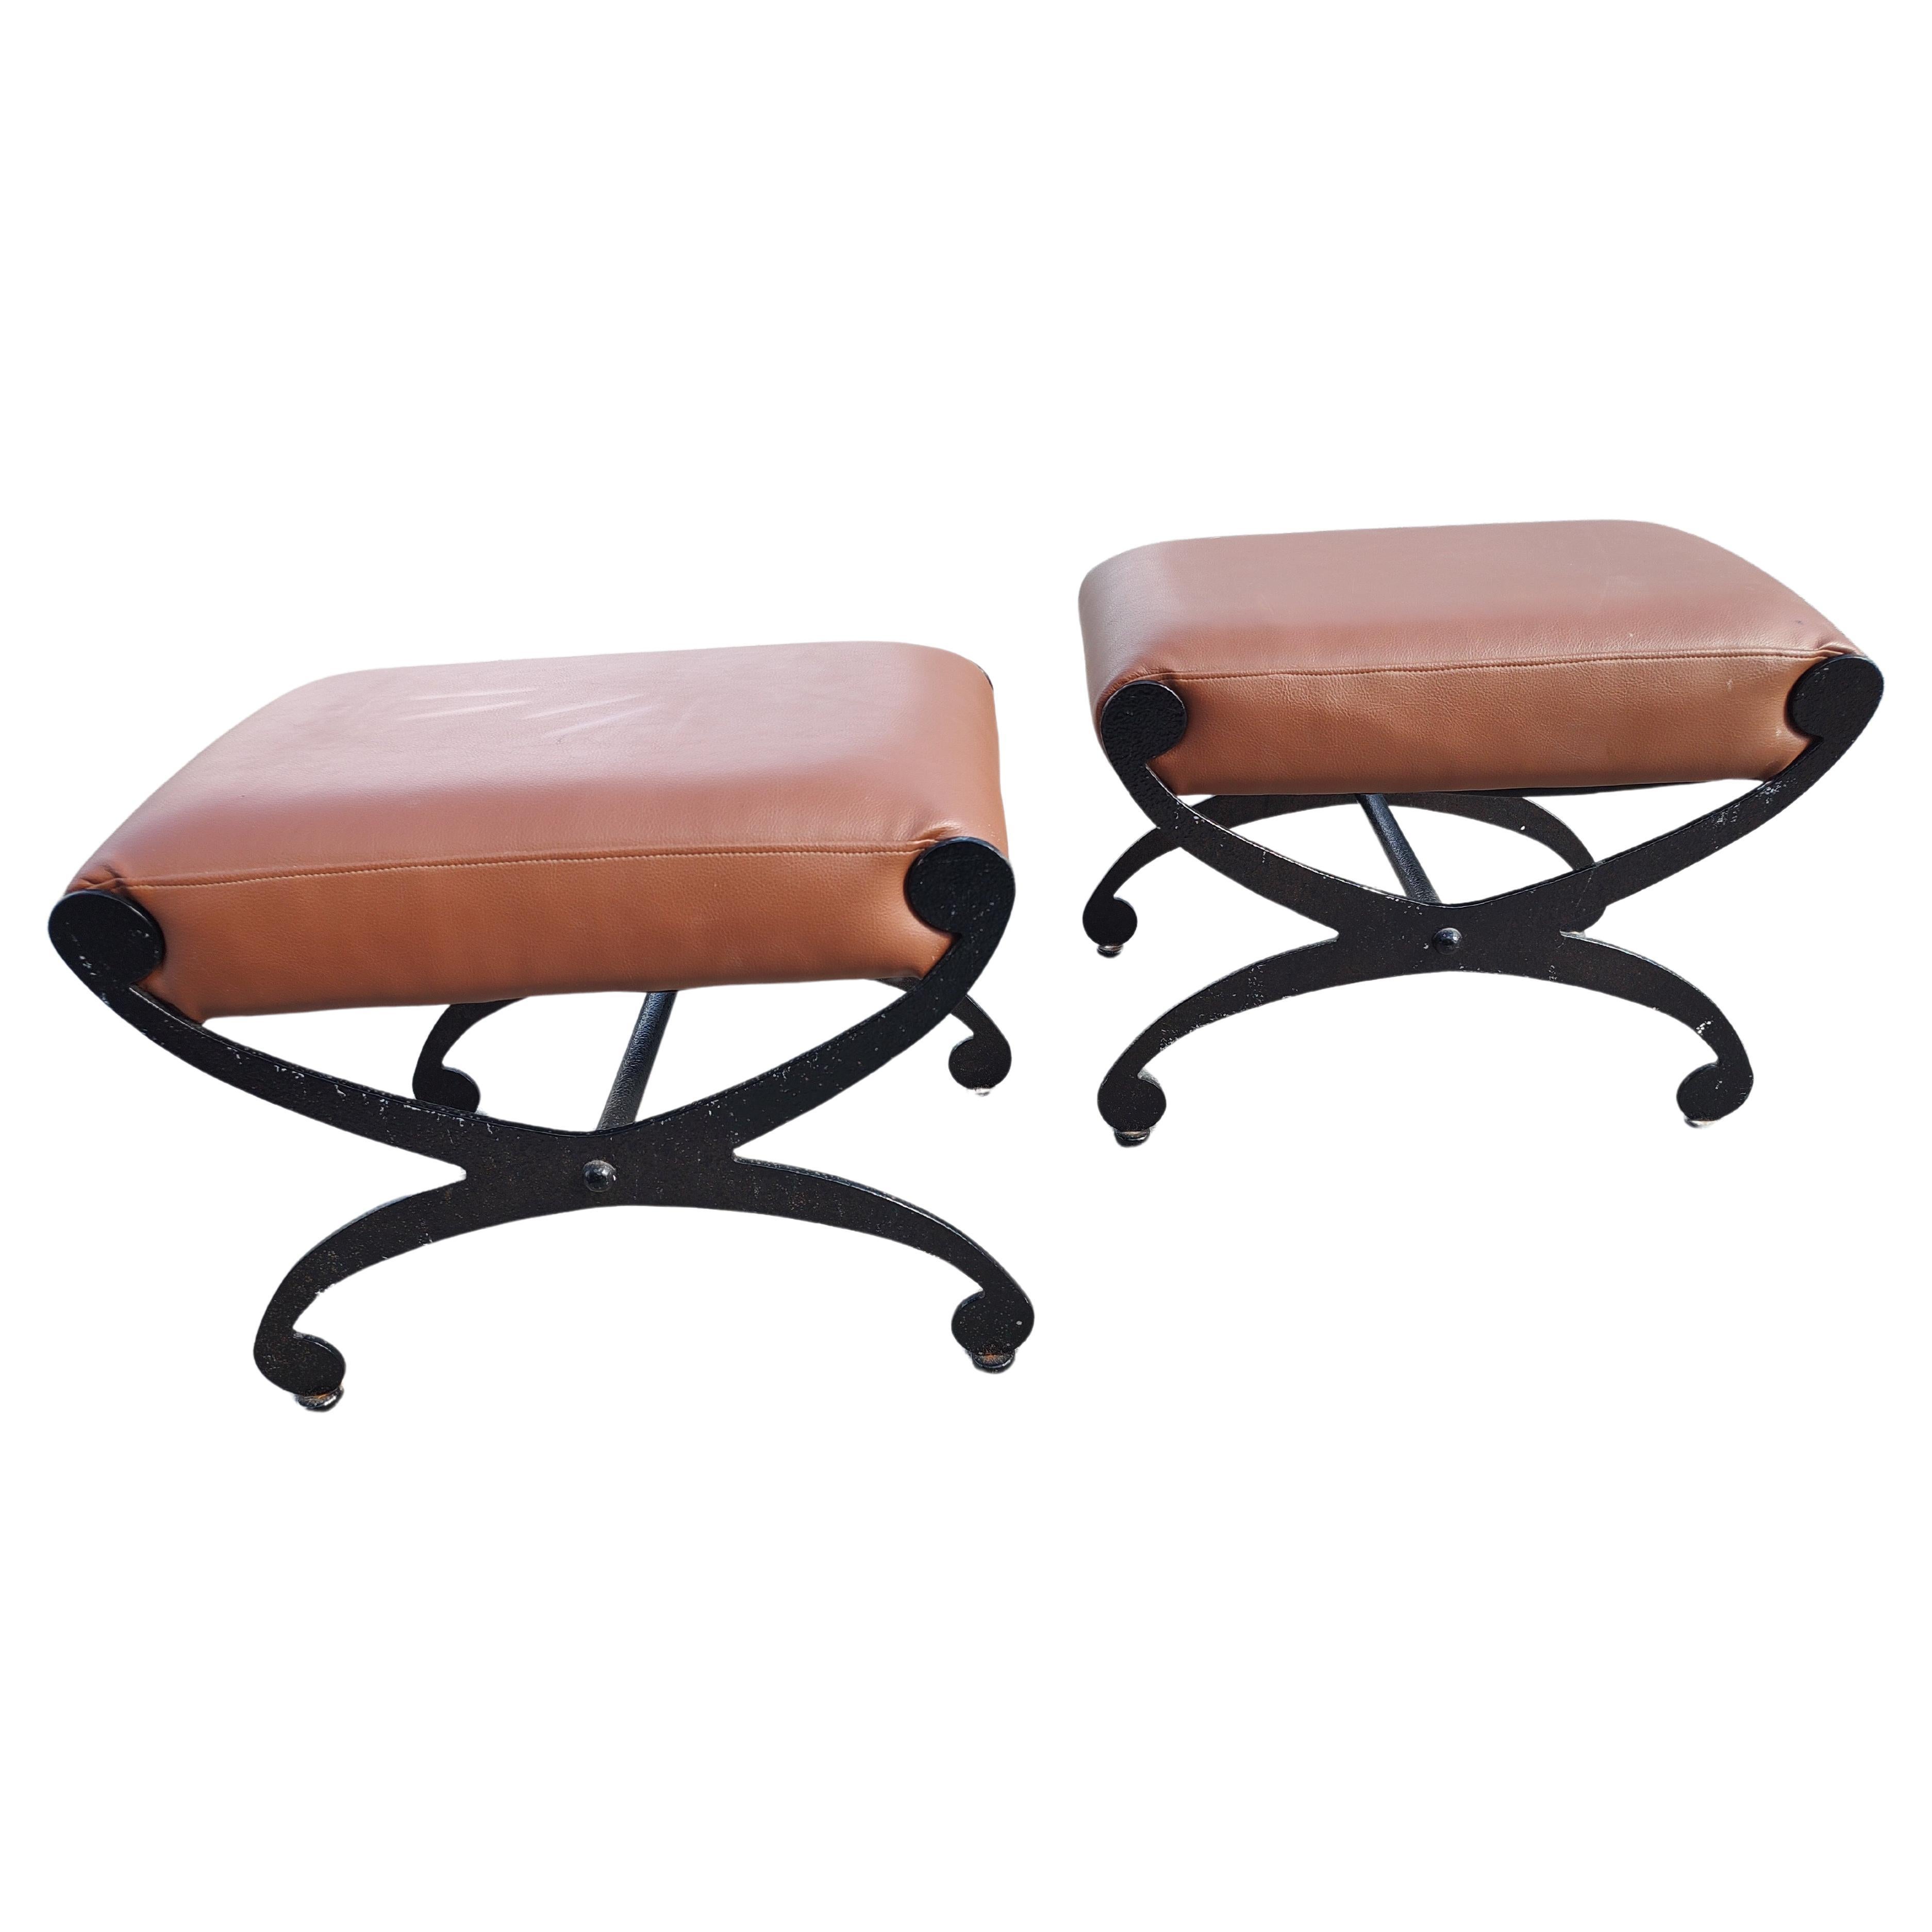 Late 20th Century Pair of Mid Century Modern Cast Iron with Brown Naughahyde Ottomans  For Sale